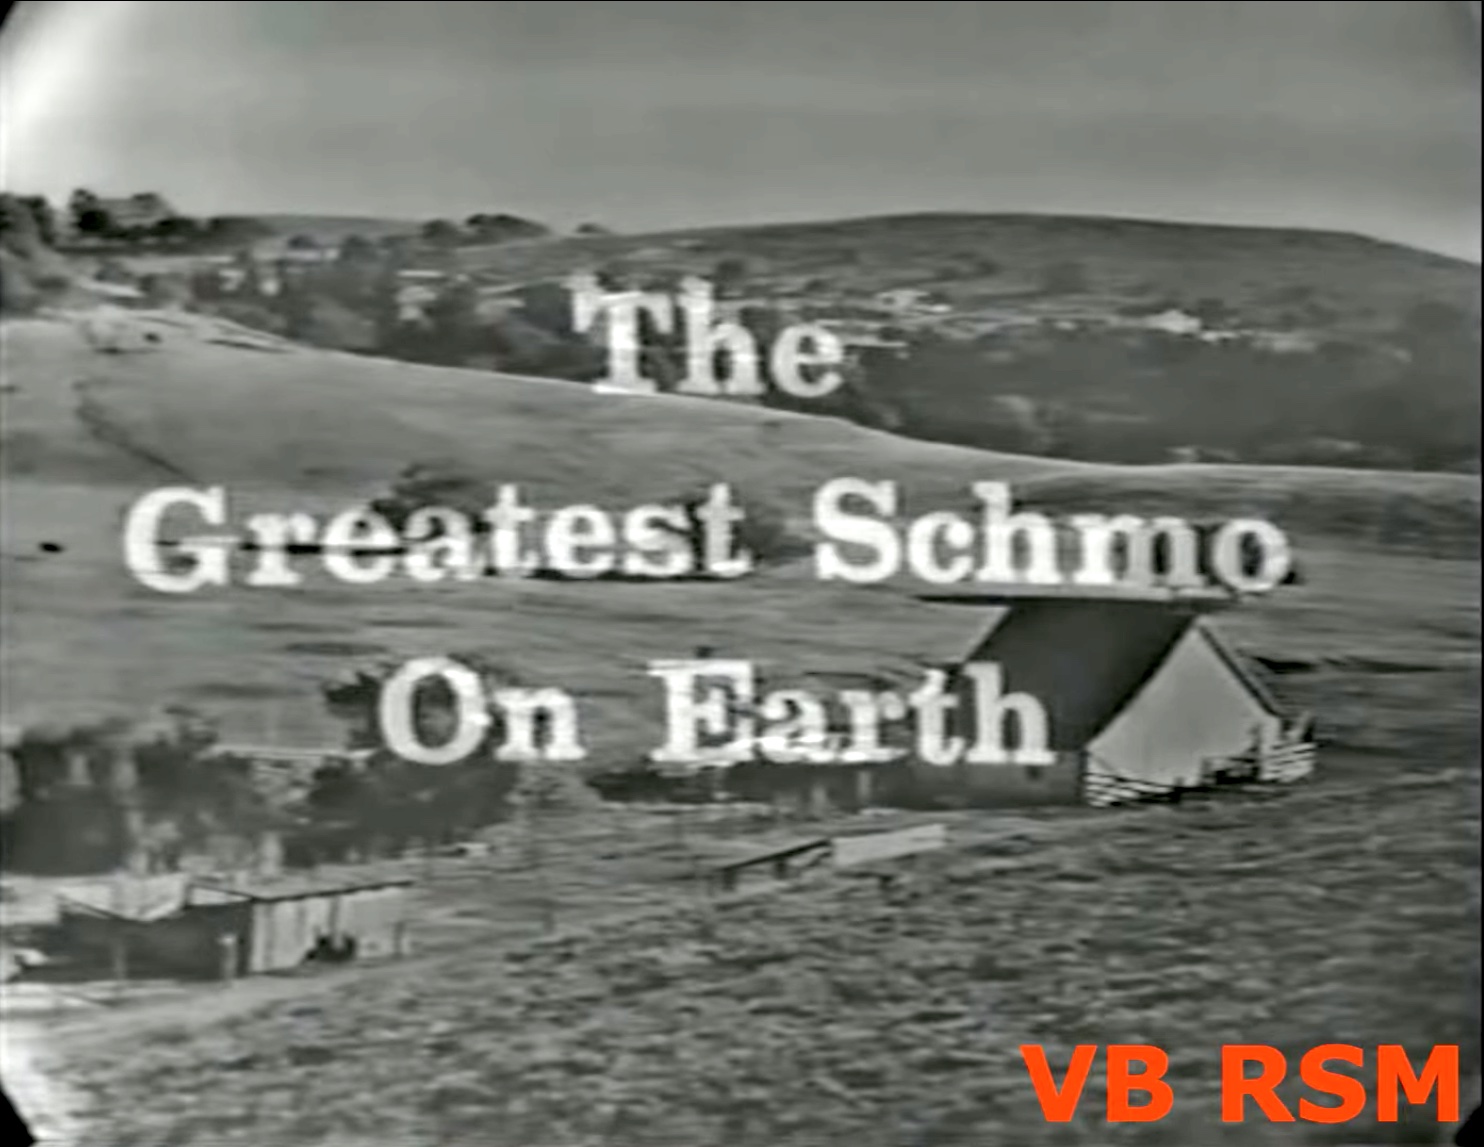 The Greatest Schmo on Earth, The Red Skelton Hour season 12, with Juliet Prowse and Phil Harris